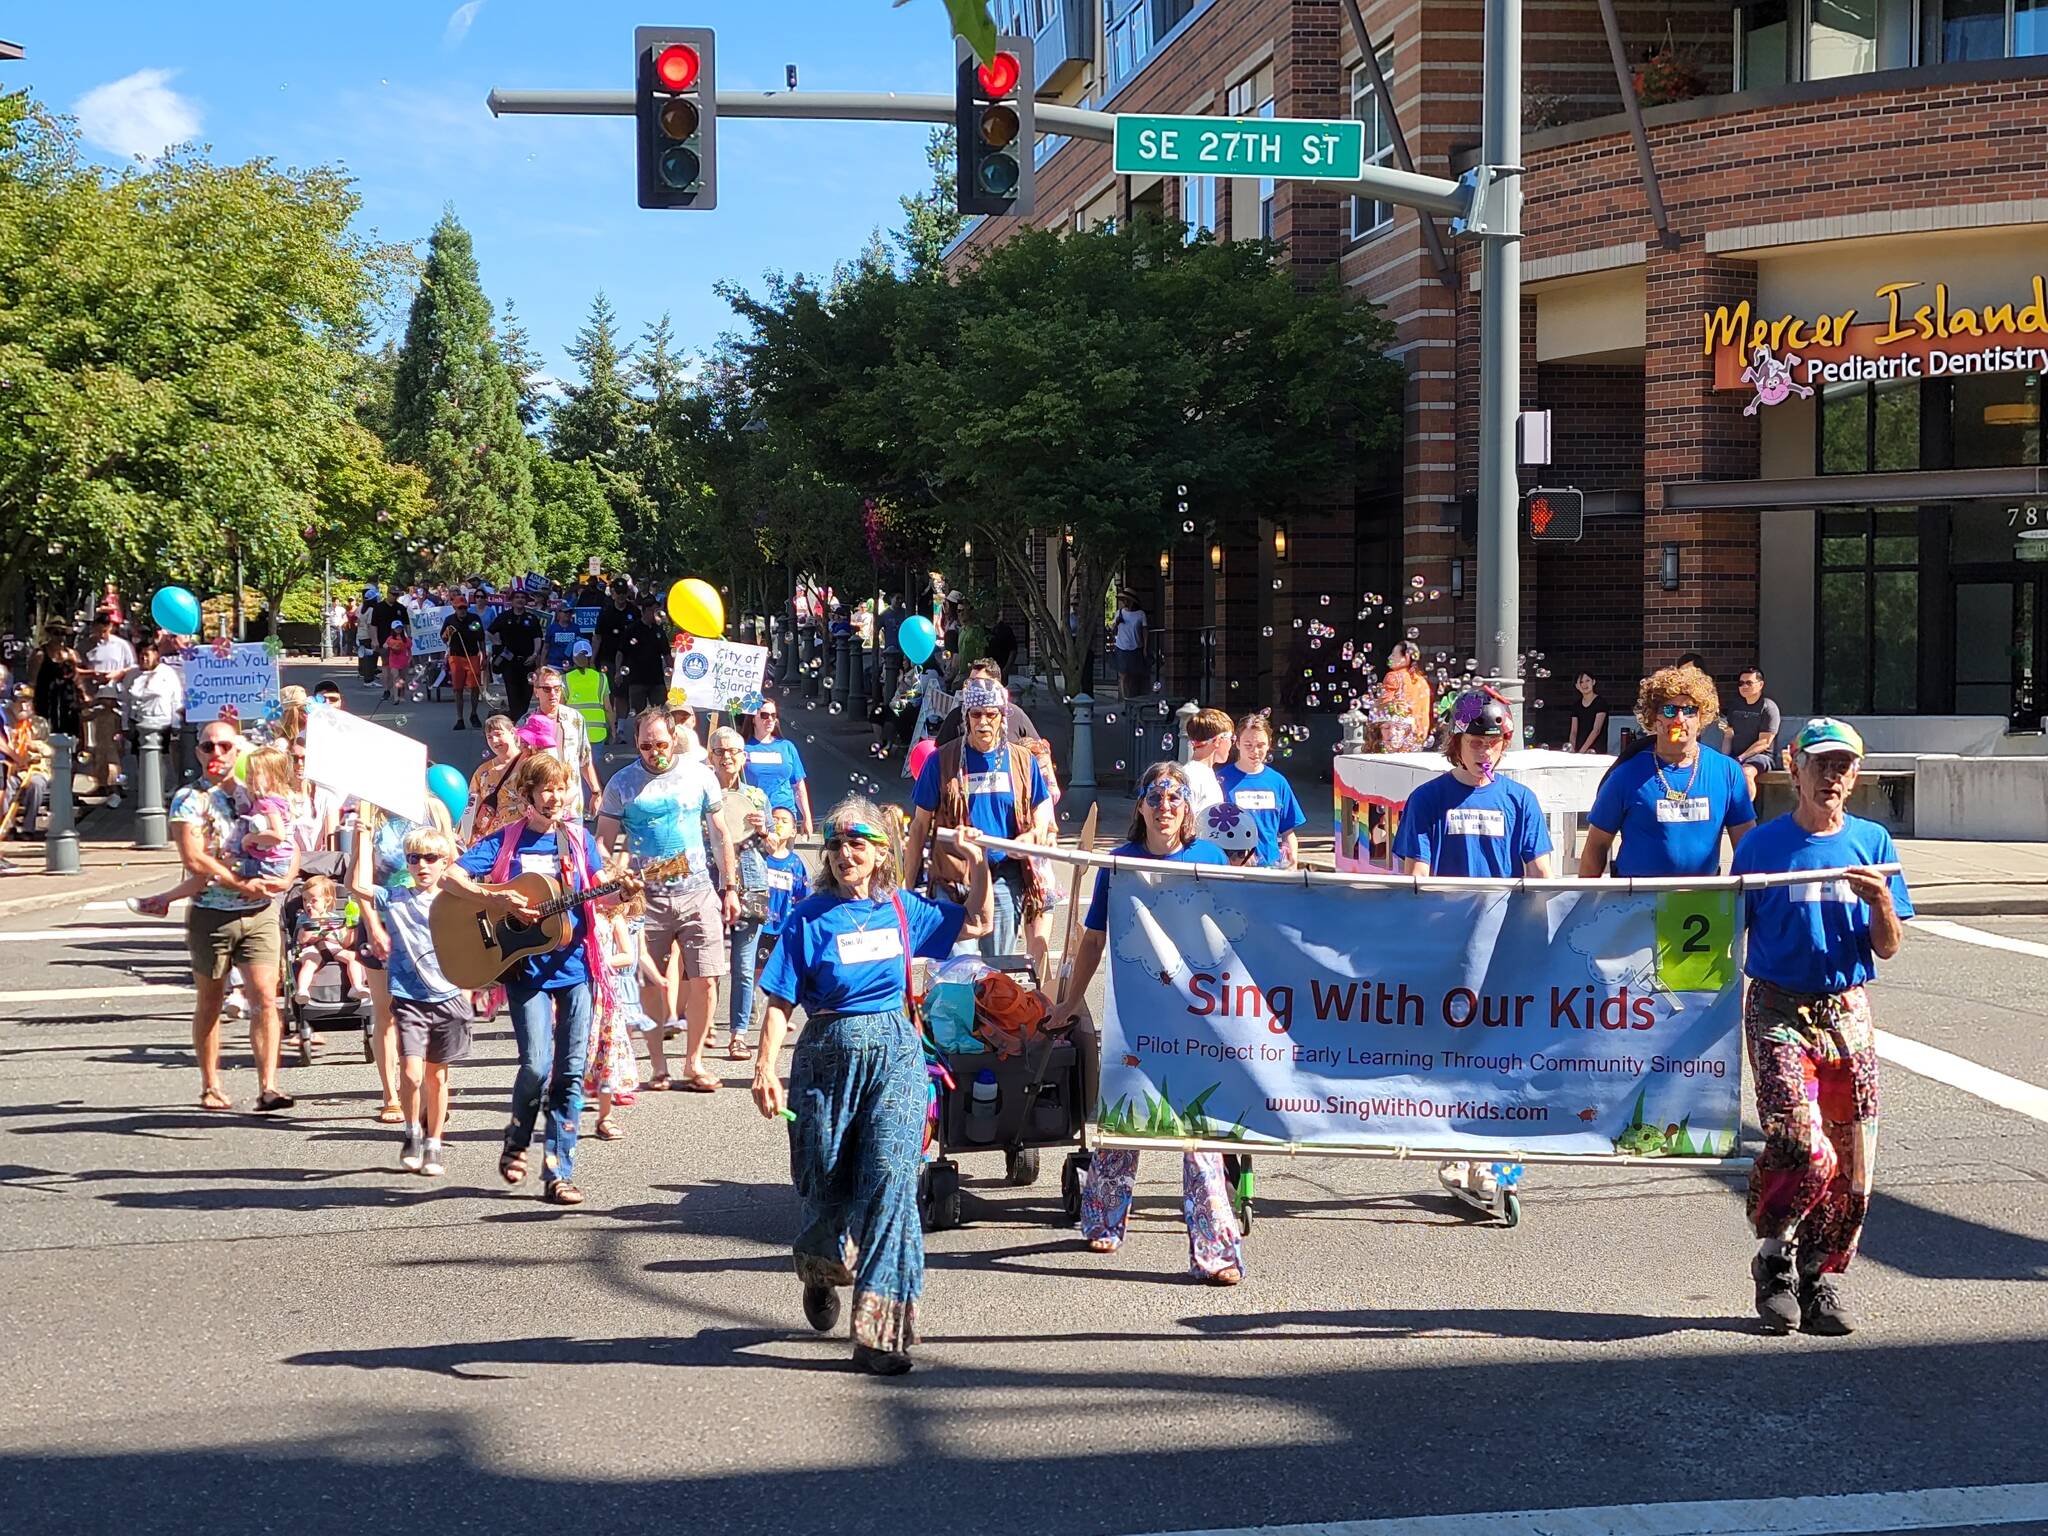 Nancy Stewart’s Sing With Our Kids and a bevy of other participants roll through the Summer Celebration community parade last year. Photo courtesy of the city of Mercer Island